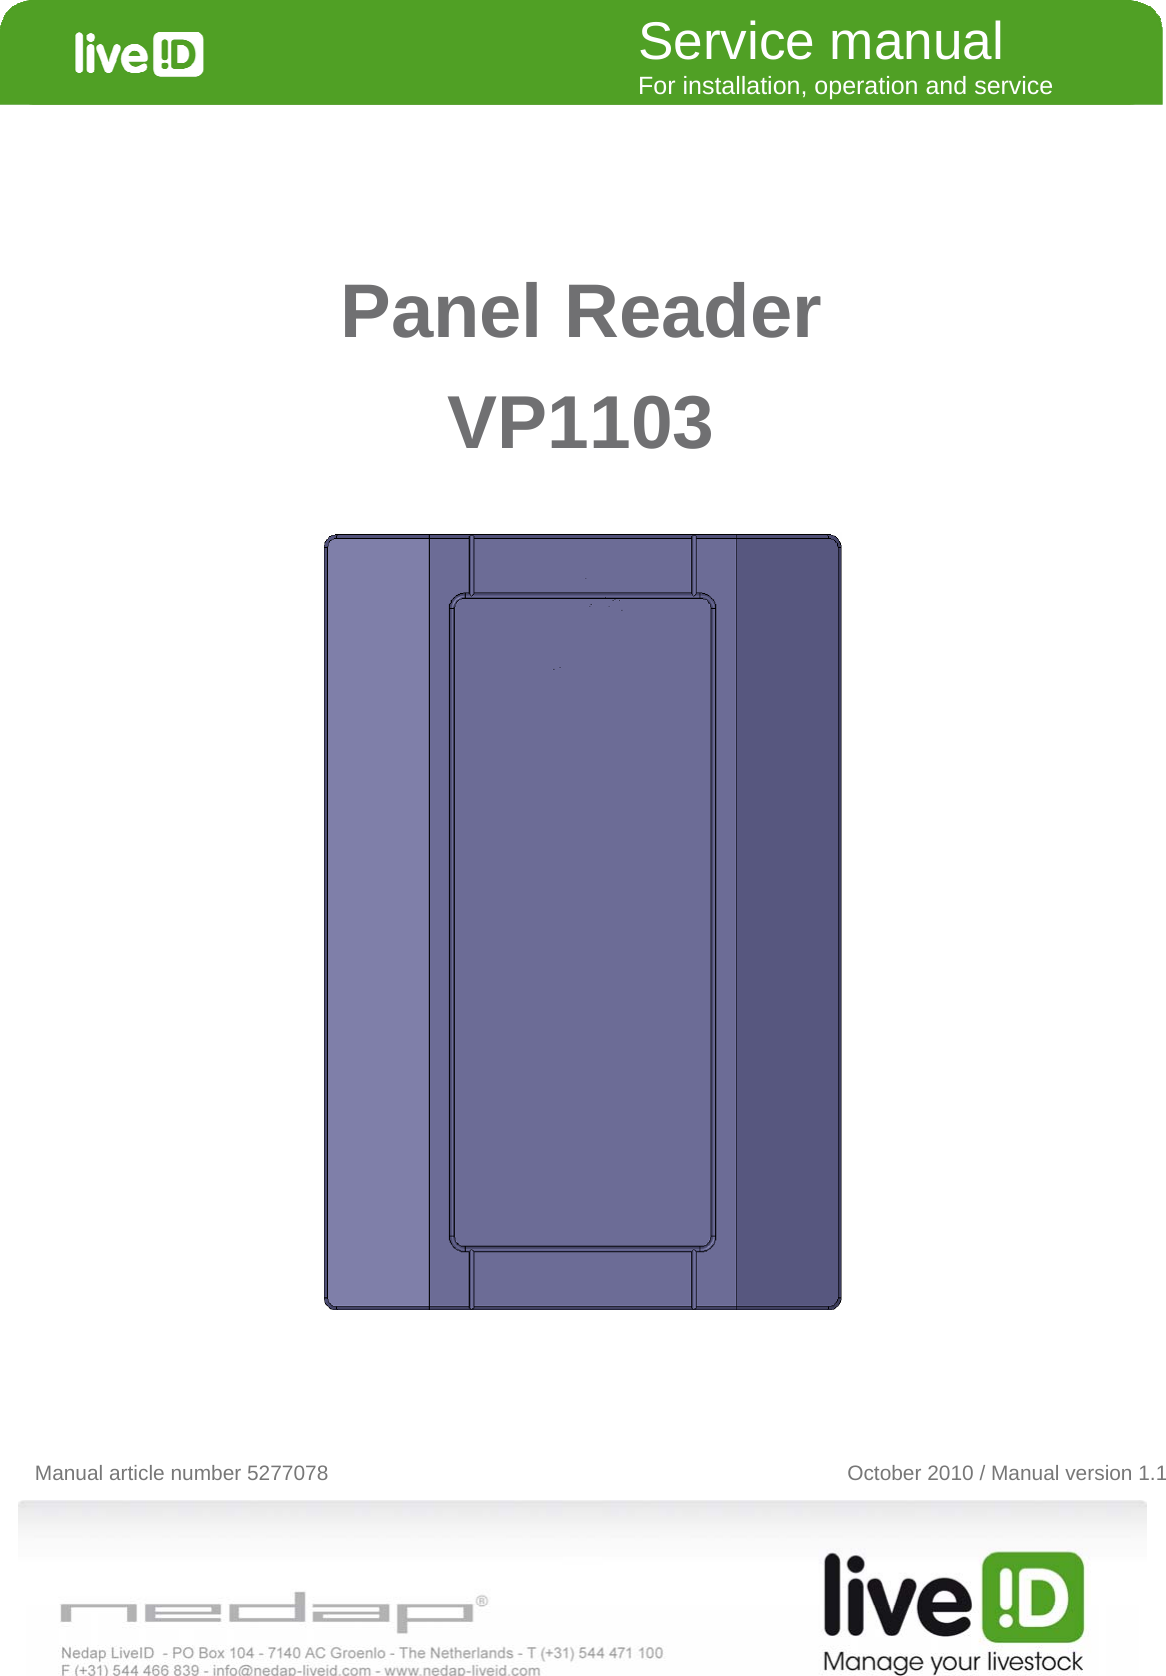   Panel Reader  VP1103         Manual article number 5277078               October 2010 / Manual version 1.1Service manual For installation, operation and service 